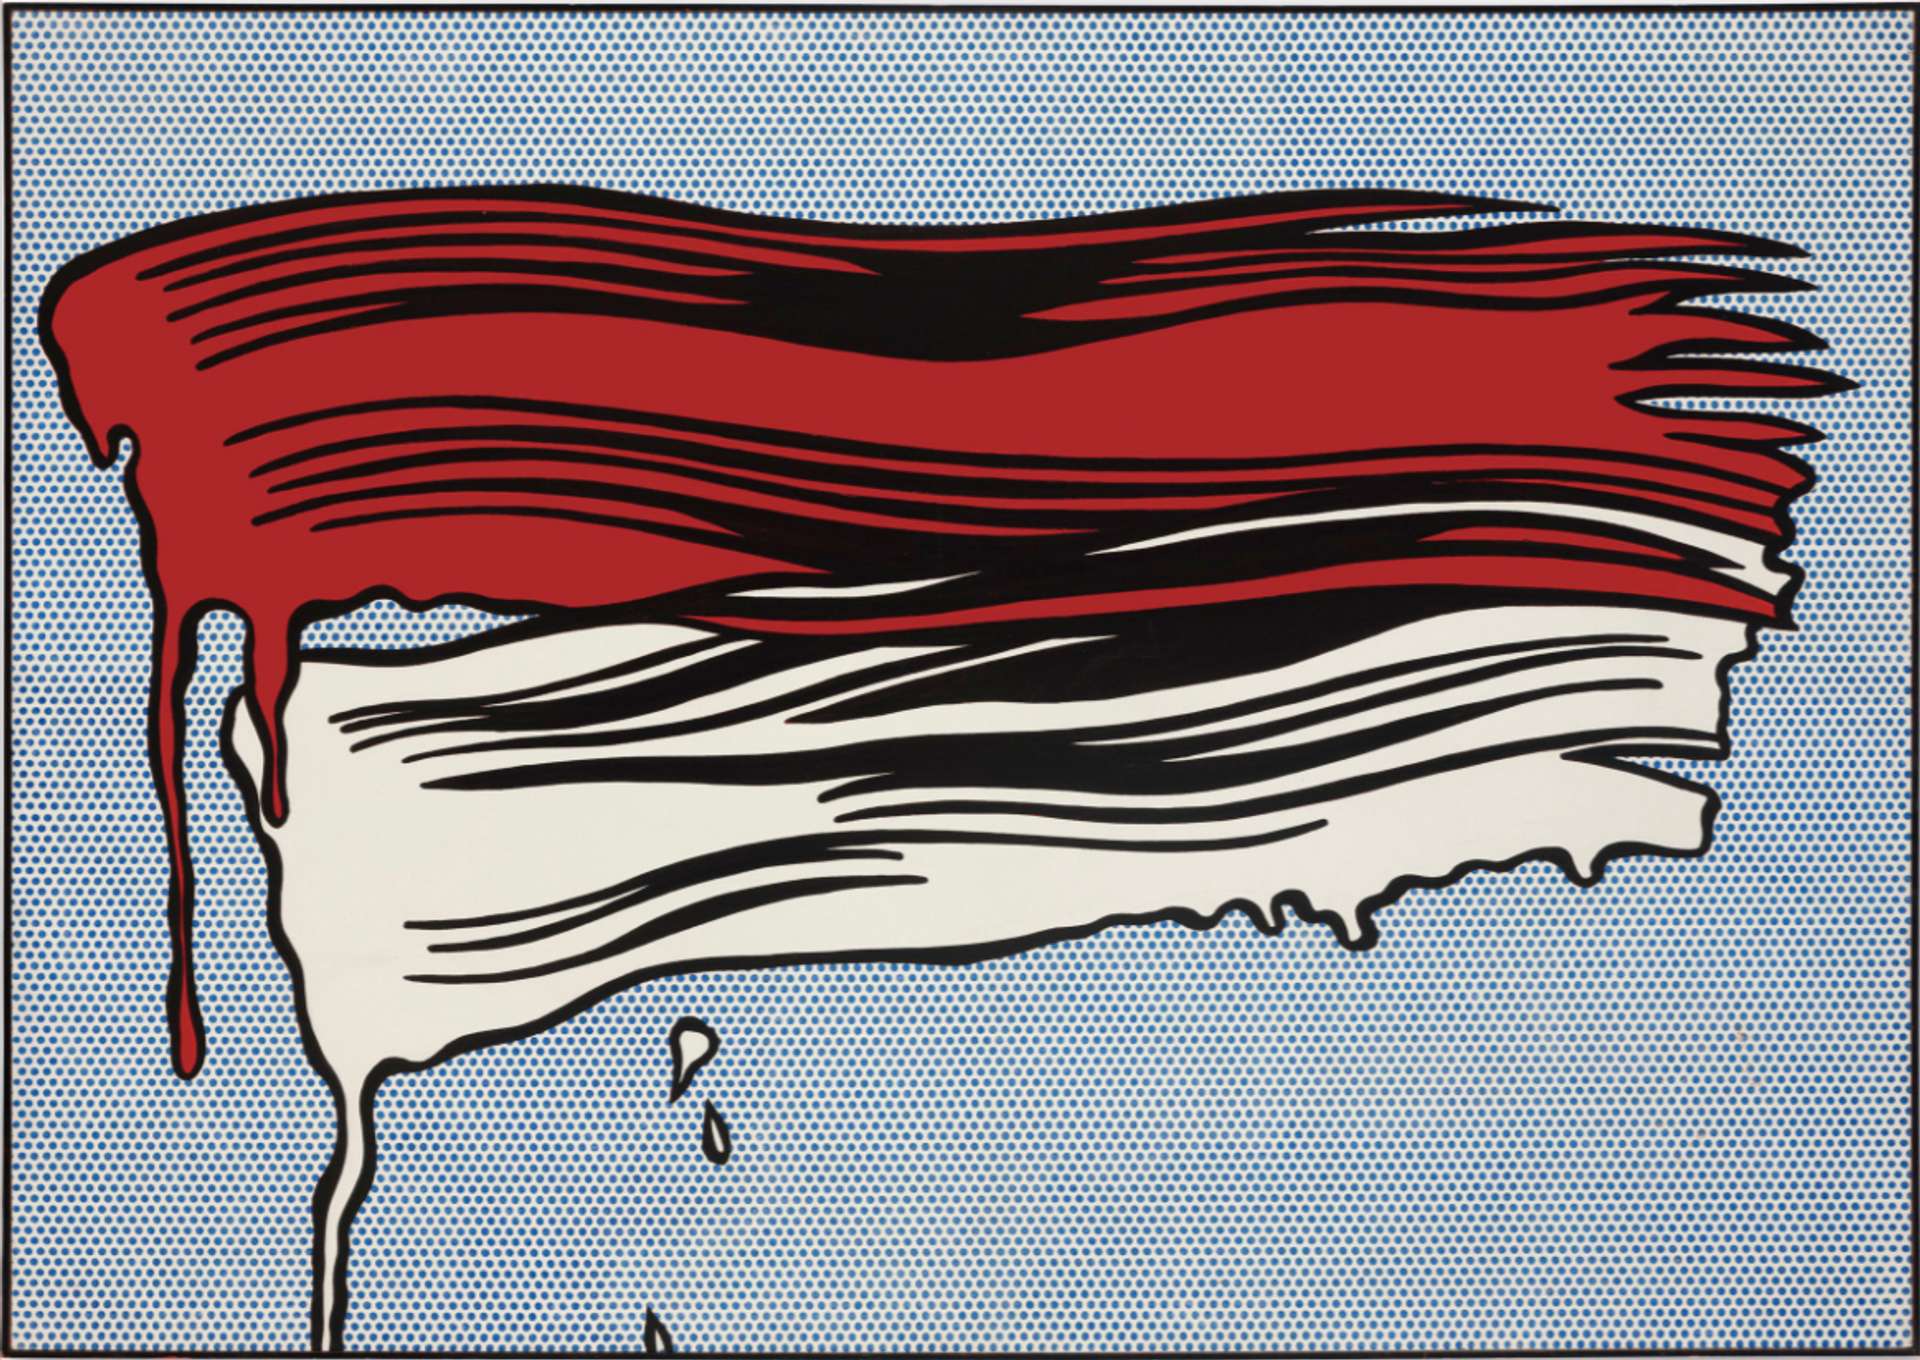 An image of the painting Red and White Brushstrokes by Roy Lichtenstein. It shows two graphic-style brushstrokes, one red and one white, against a background of blue Ben-Day dots.